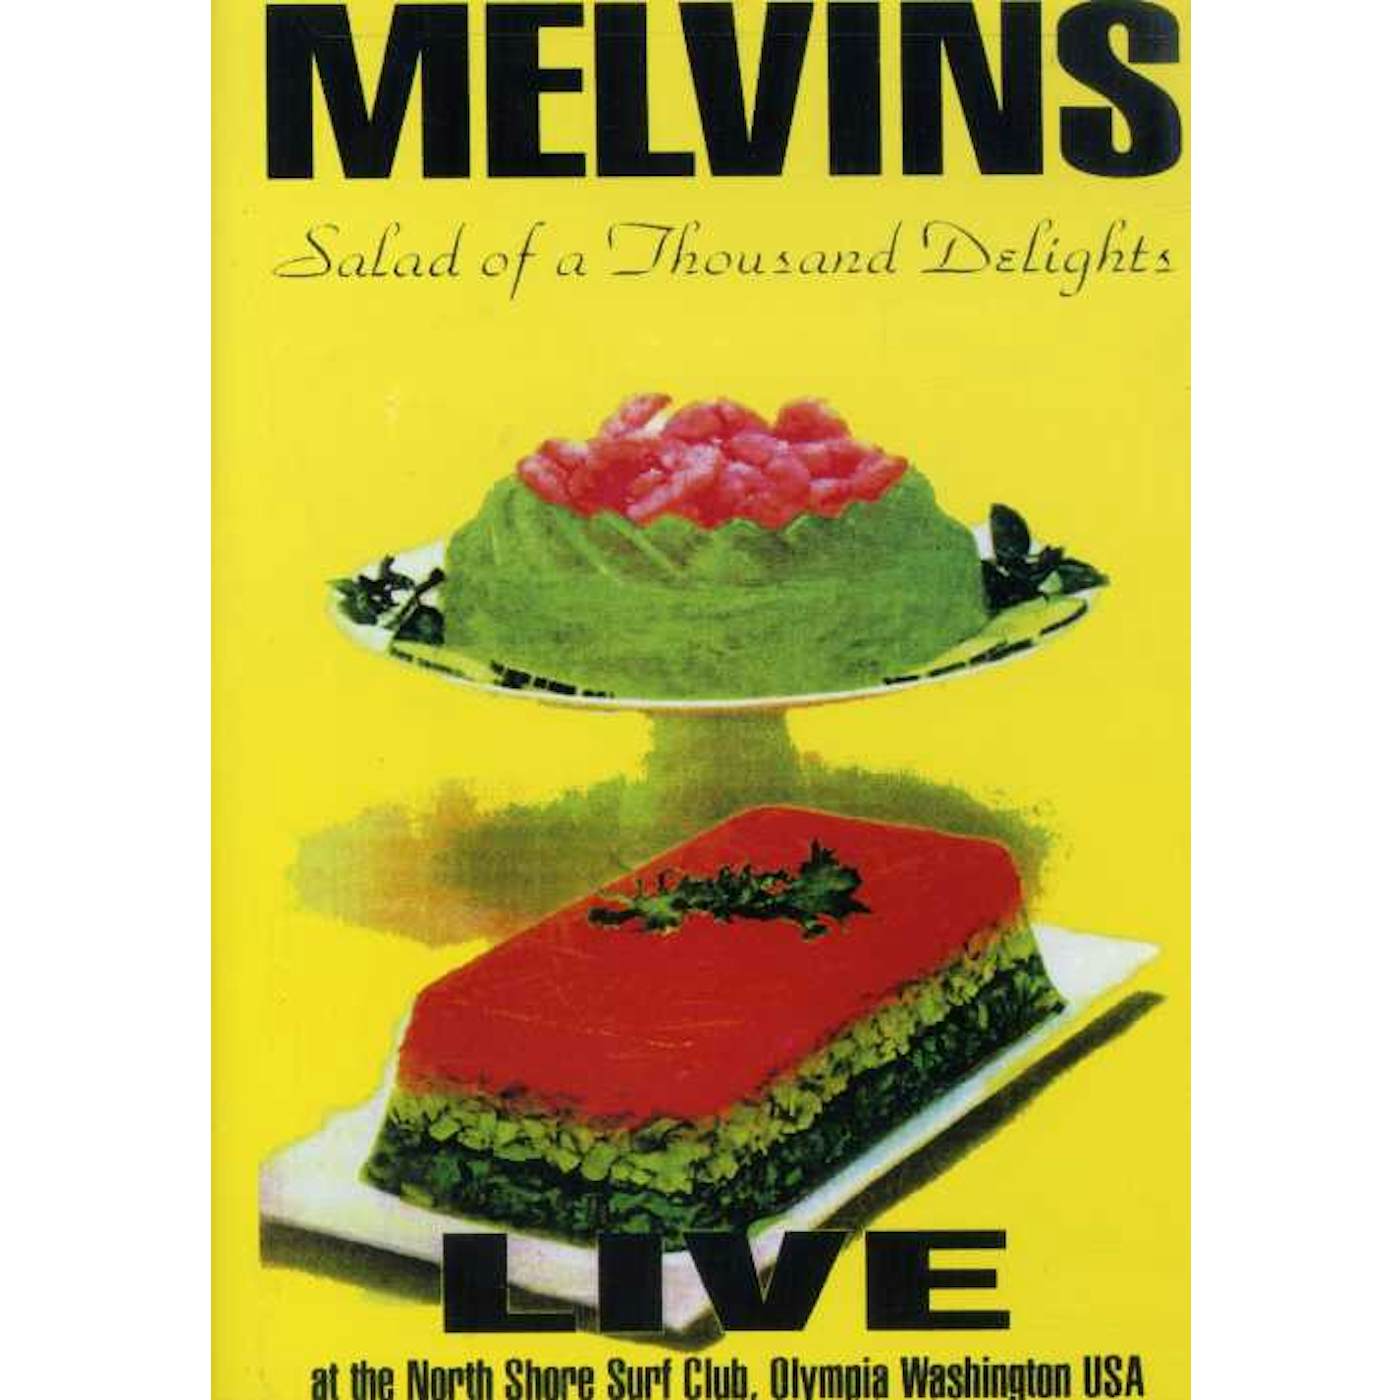 Melvins SALAD OF THOUSAND DELIGHTS DVD